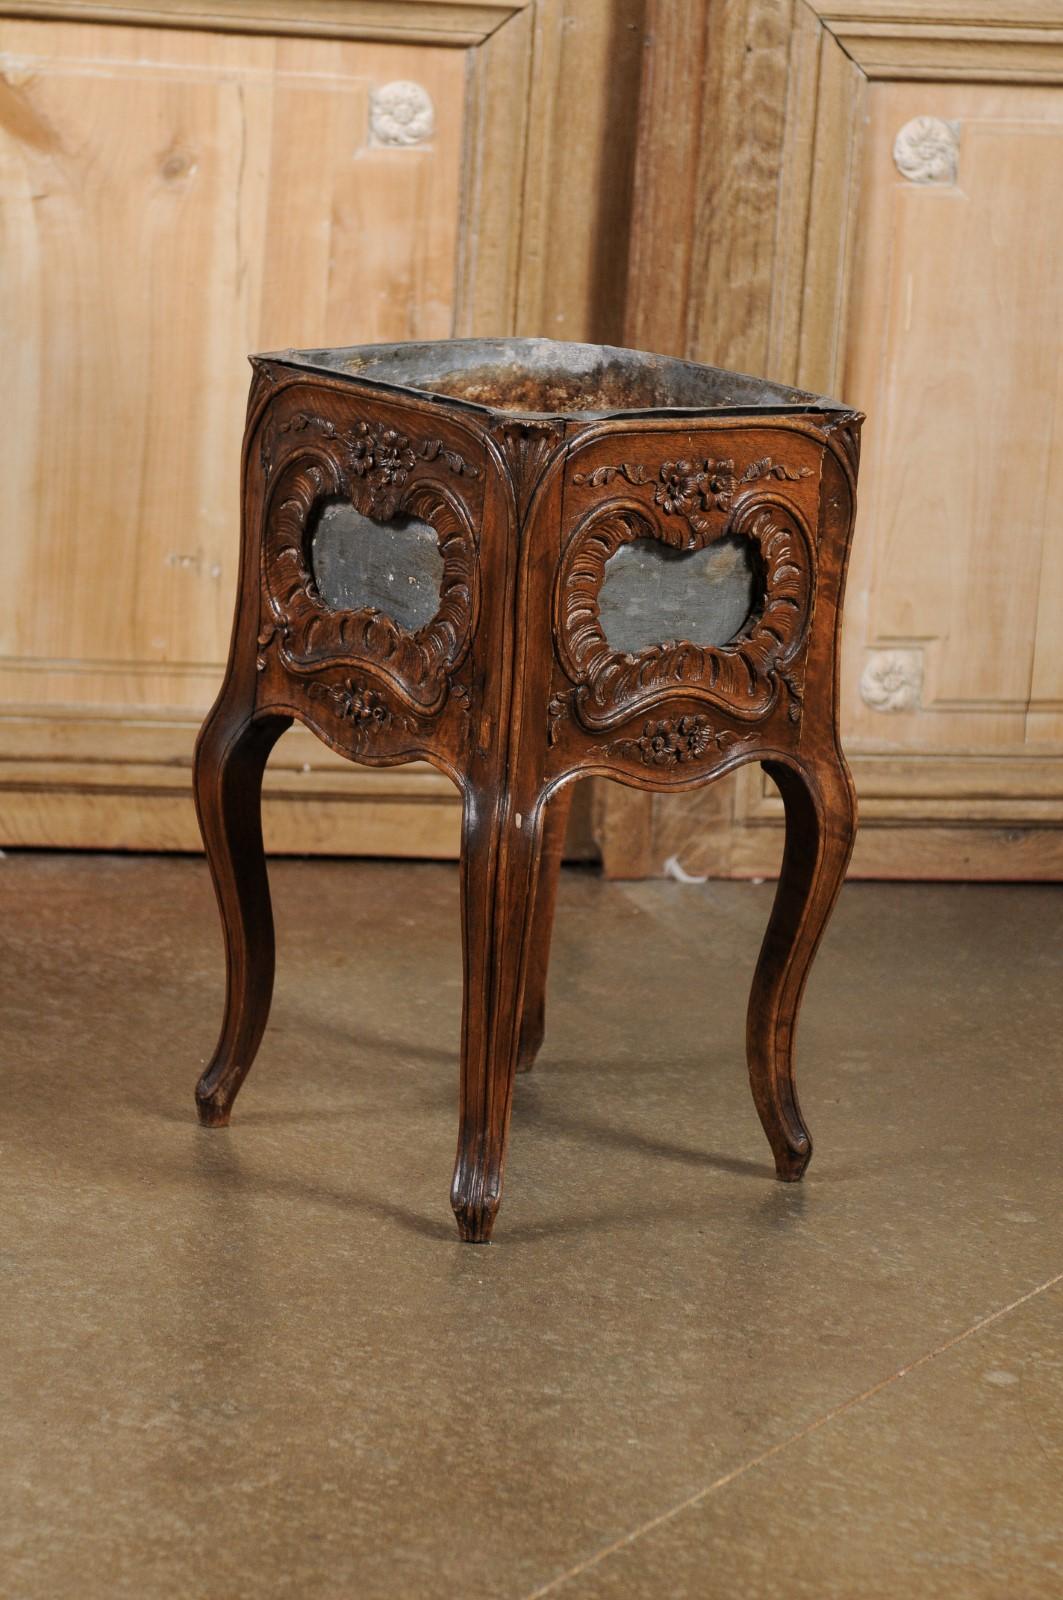 French 1890s Rococo Revival Walnut Planter with Rocailles and Floral Motifs For Sale 5